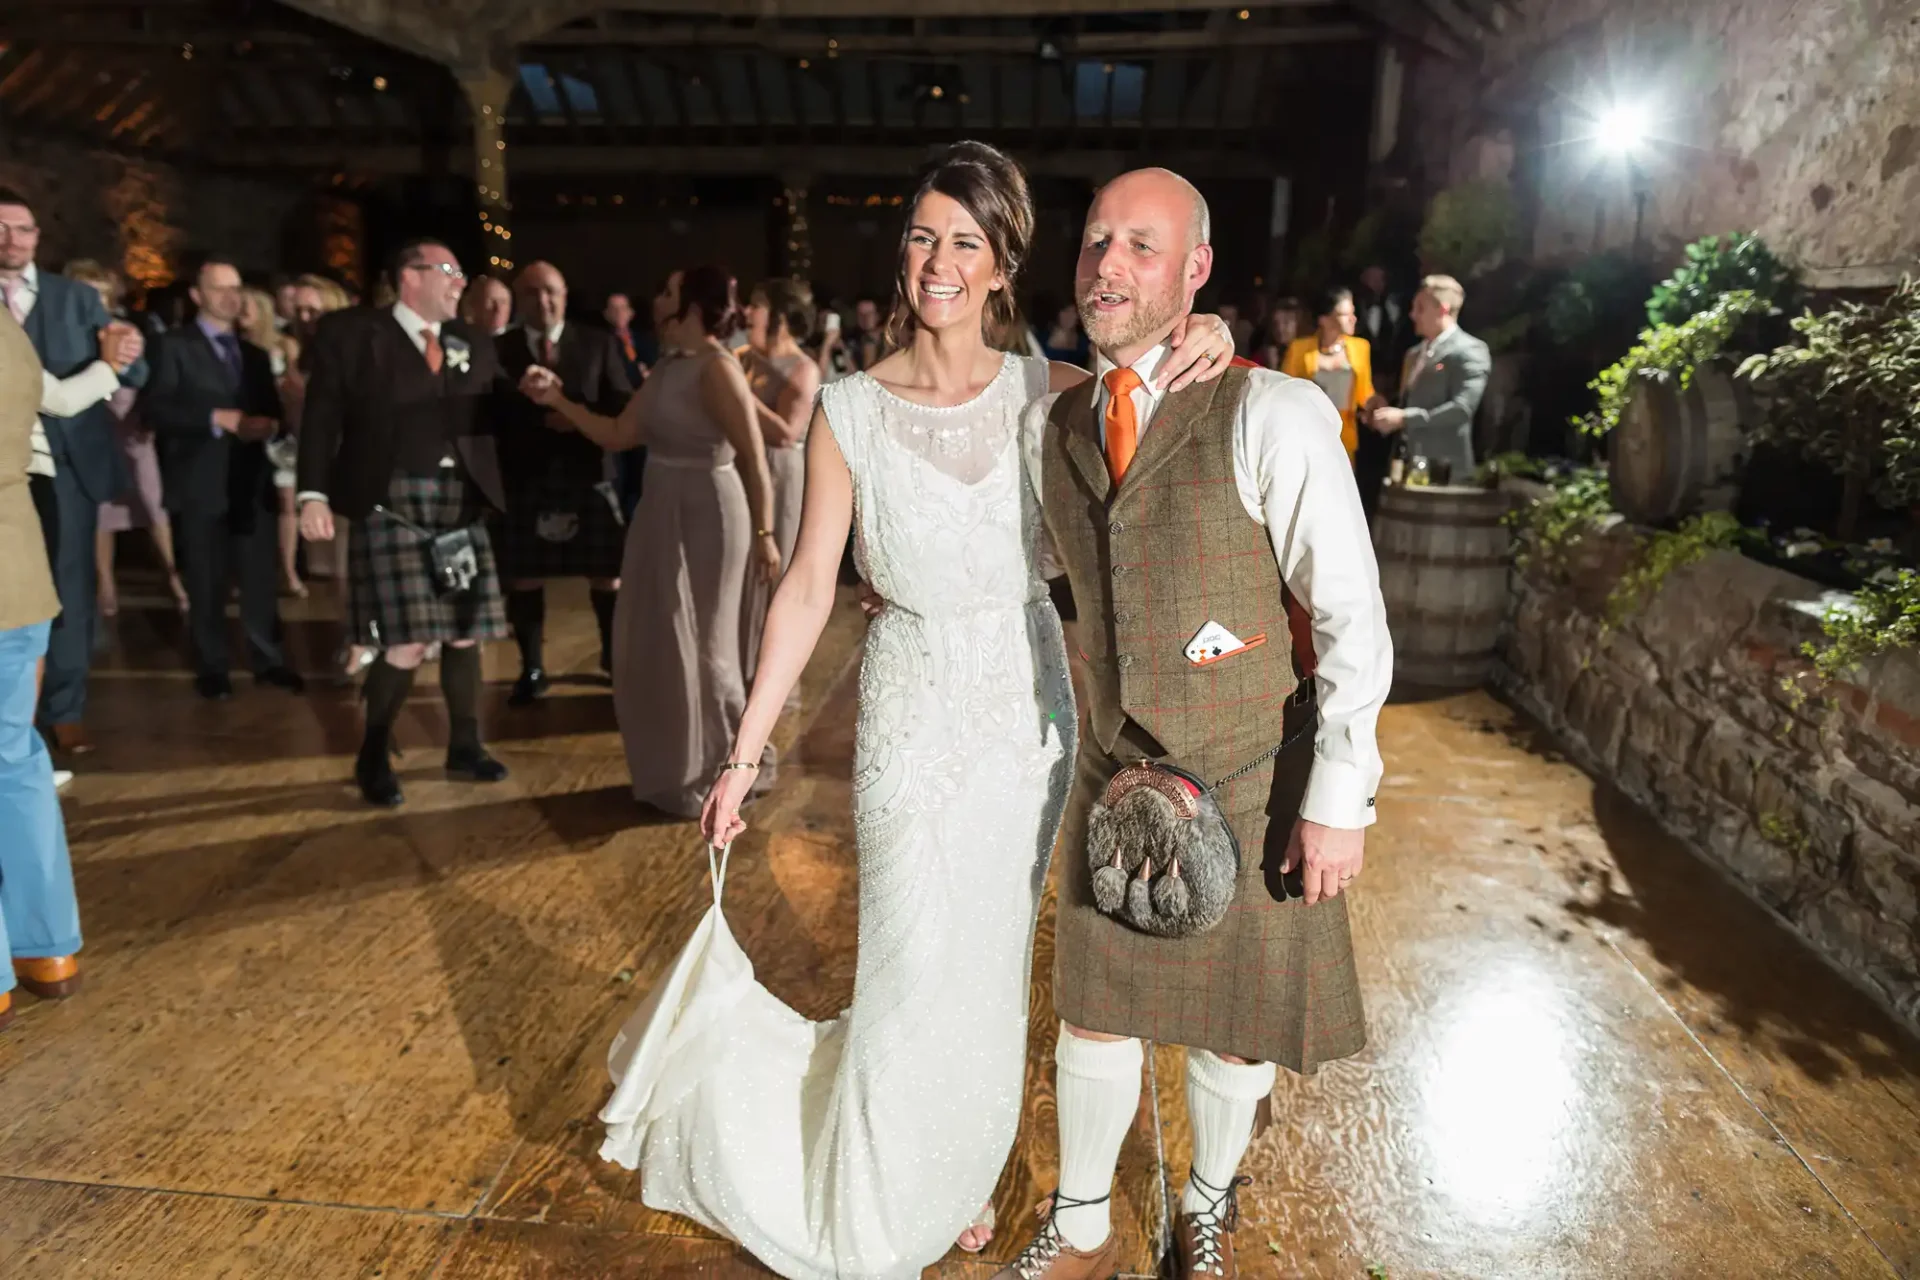 A bride in a white lace dress and a groom in a kilt and tweed jacket walk hand in hand, smiling at a wedding reception.